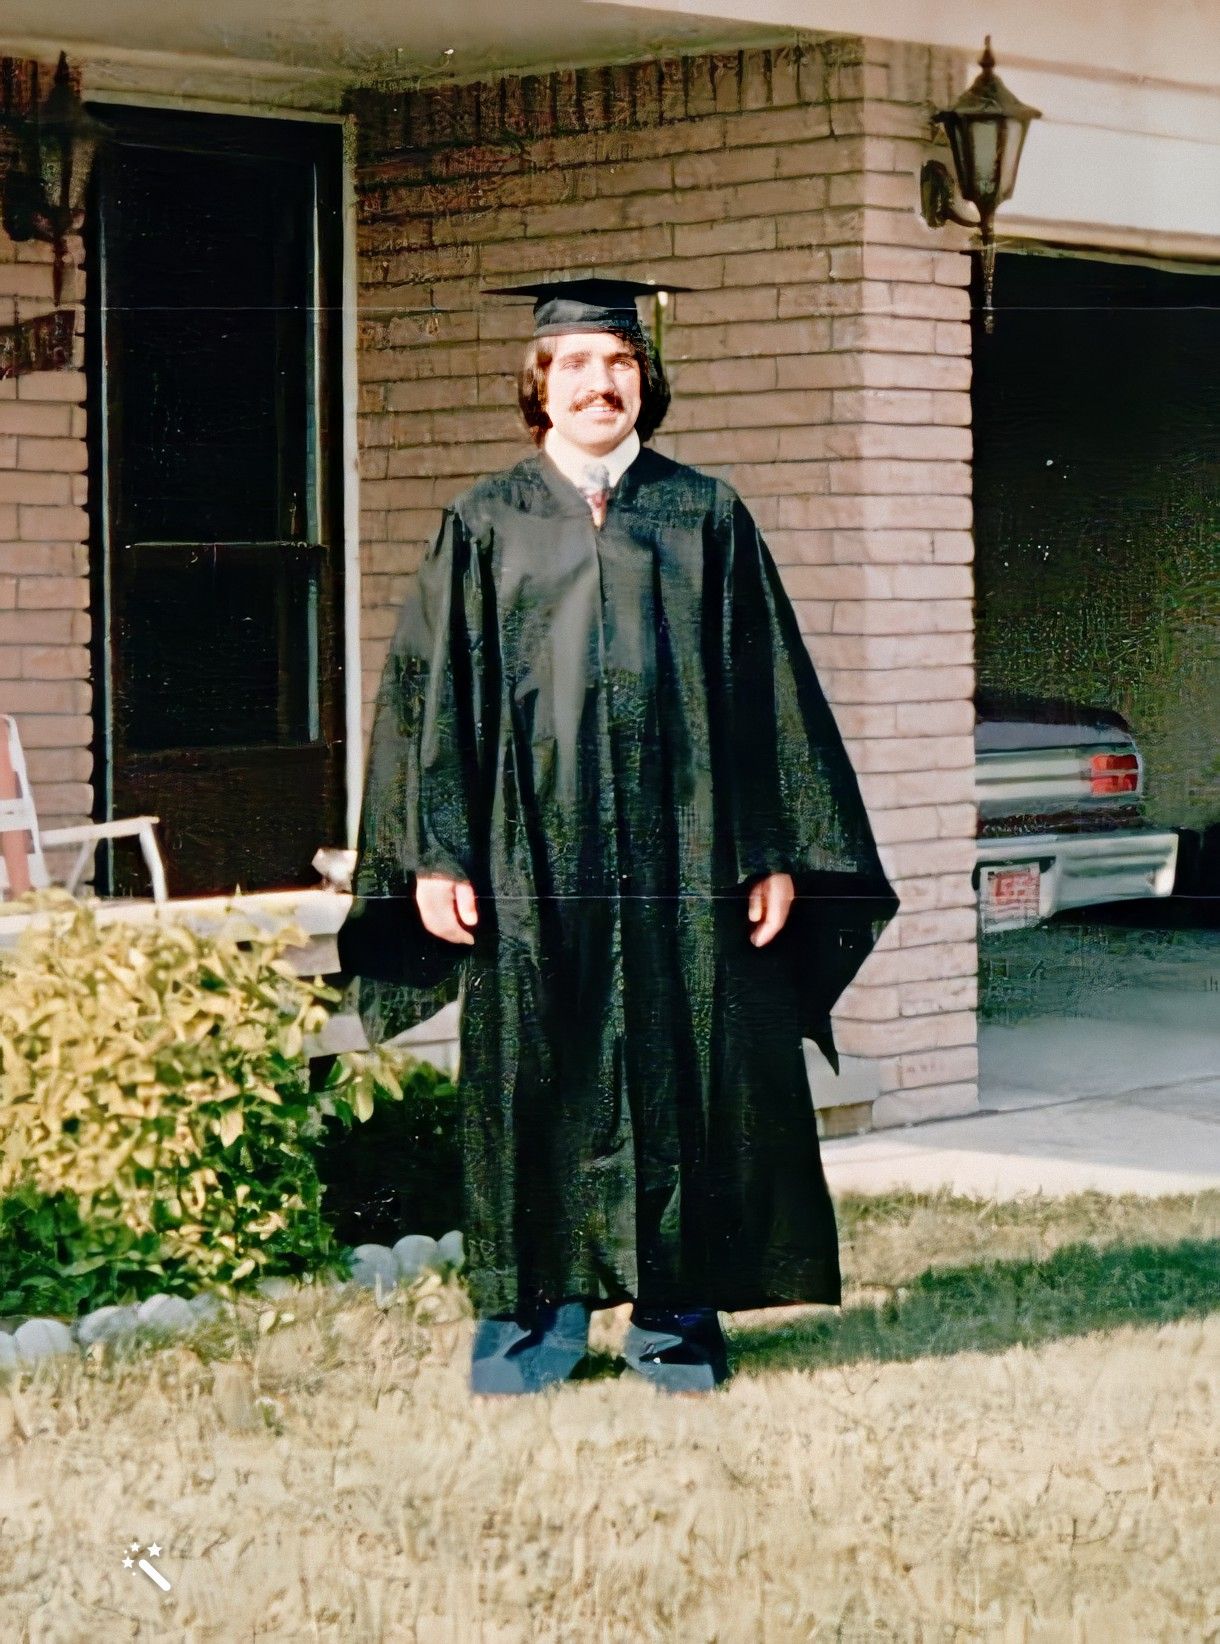 Jerry Franchina on his Wayne State graduation day in 1978